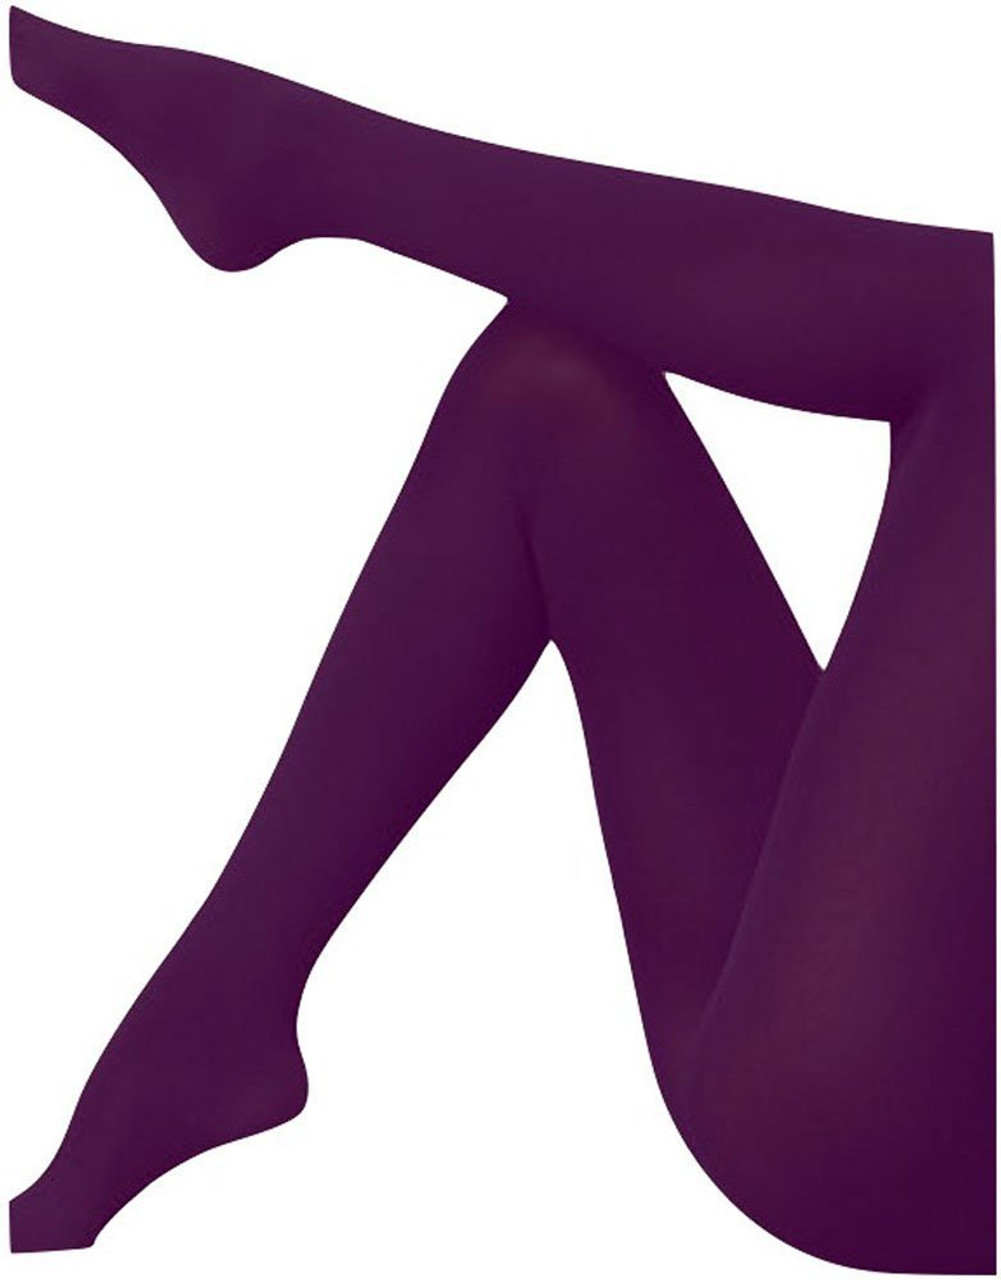 https://cdn11.bigcommerce.com/s-bb2b7/images/stencil/1280x1280/products/8302/15262/Purple_Opaque_Pantyhose_Tights_8063__08837.1581036850.jpg?c=2